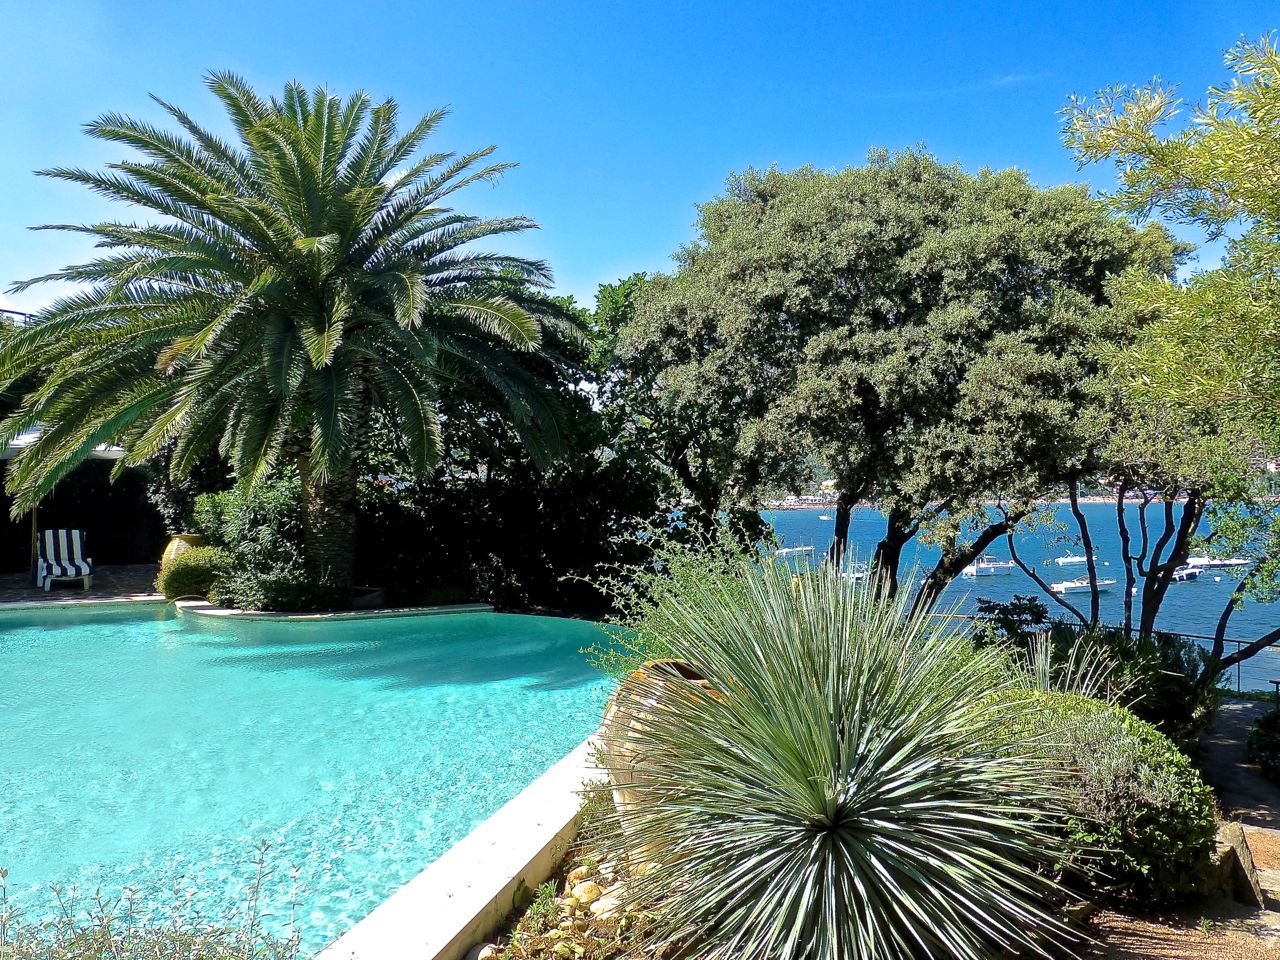 Swimming Pool with sea views and beach access from the garden